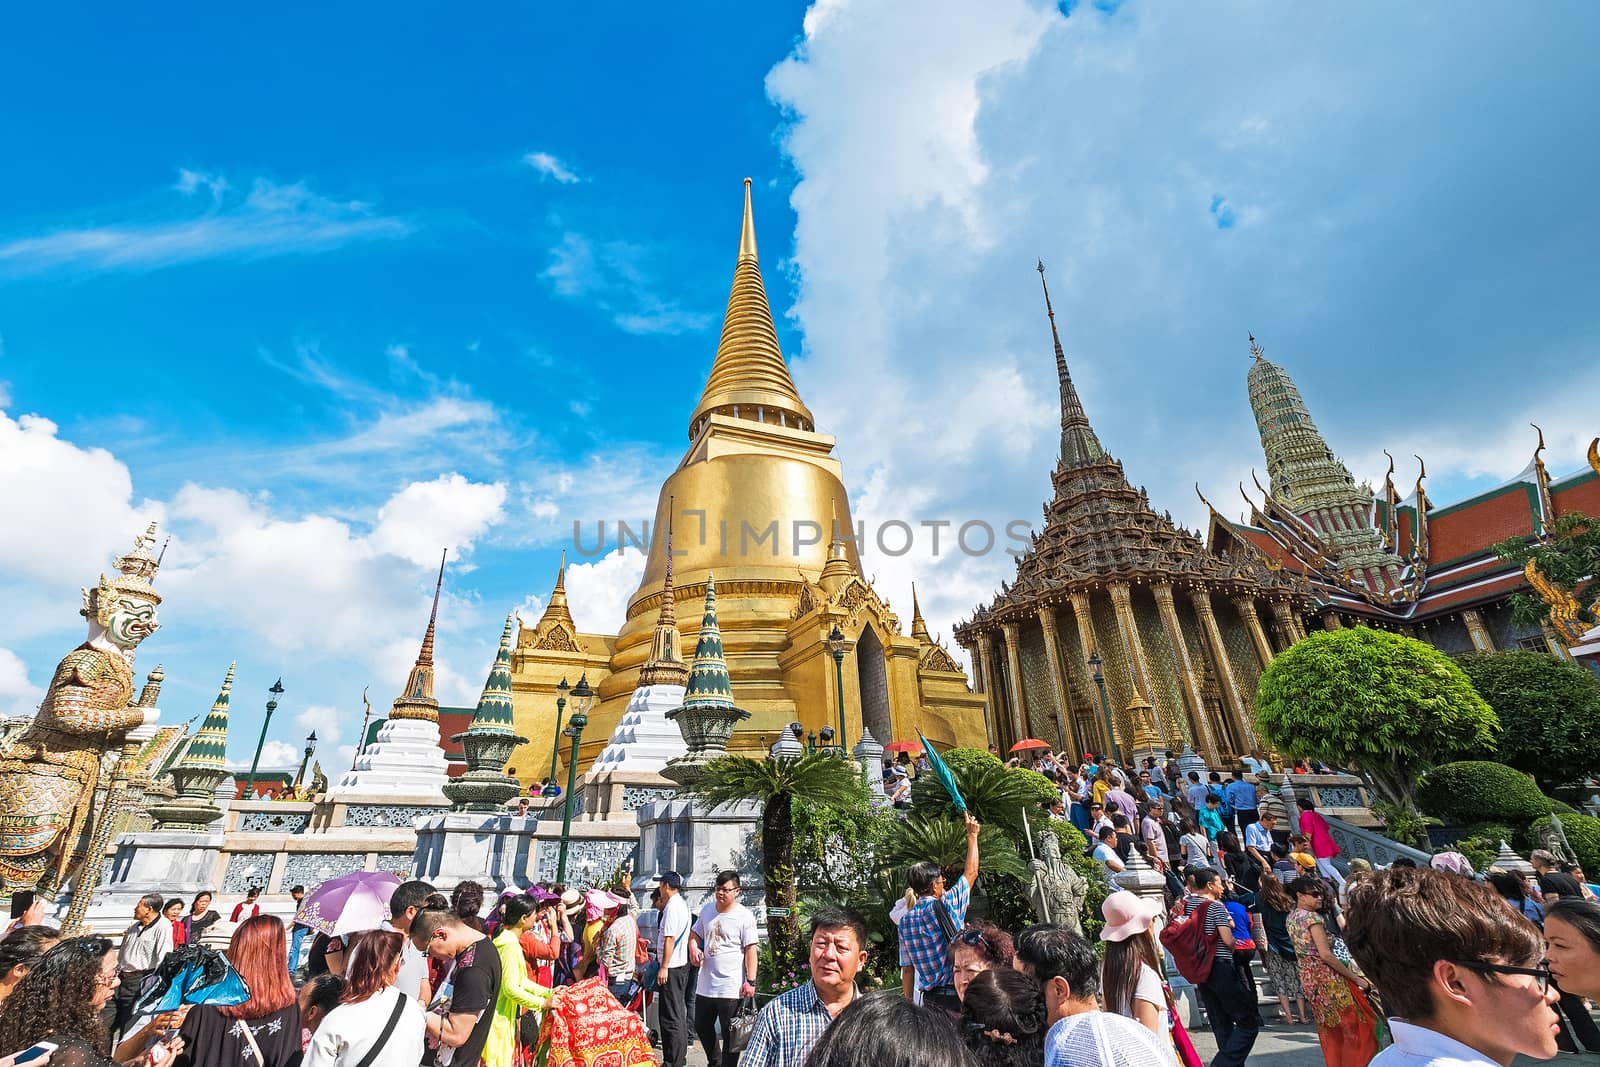 BANGKOK, THAILAND - JAN 9 : Unidentified tourists at Wat Phra Kaew on Jan 9 2016 in Bangkok, Thailand. Wat Phra Kaew is one of the most popular tourists destination in Thailand.